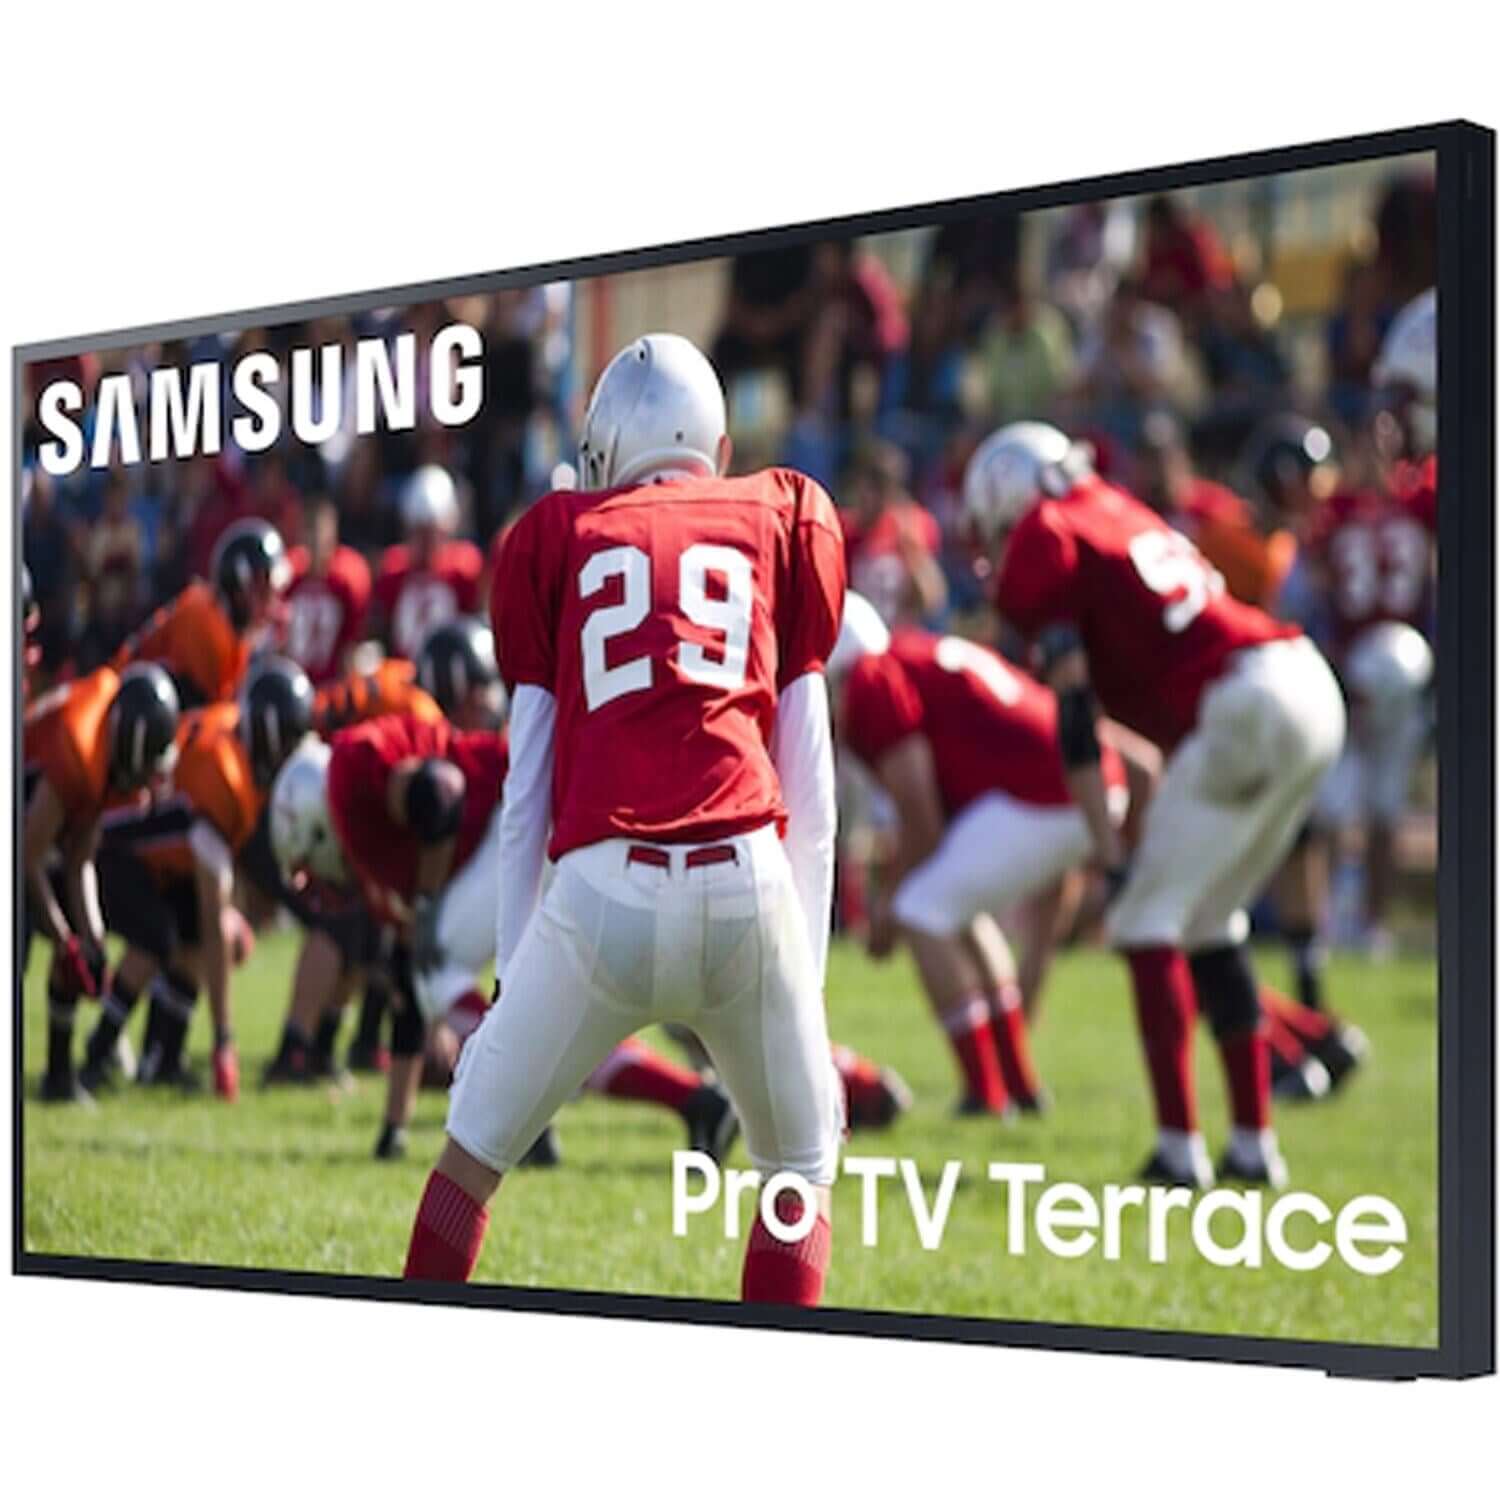 Provision Projectors Outdoor Display Samsung BH75T 75" Pro TV Terrace Edition Outdoor QLED 1500nit 16/7